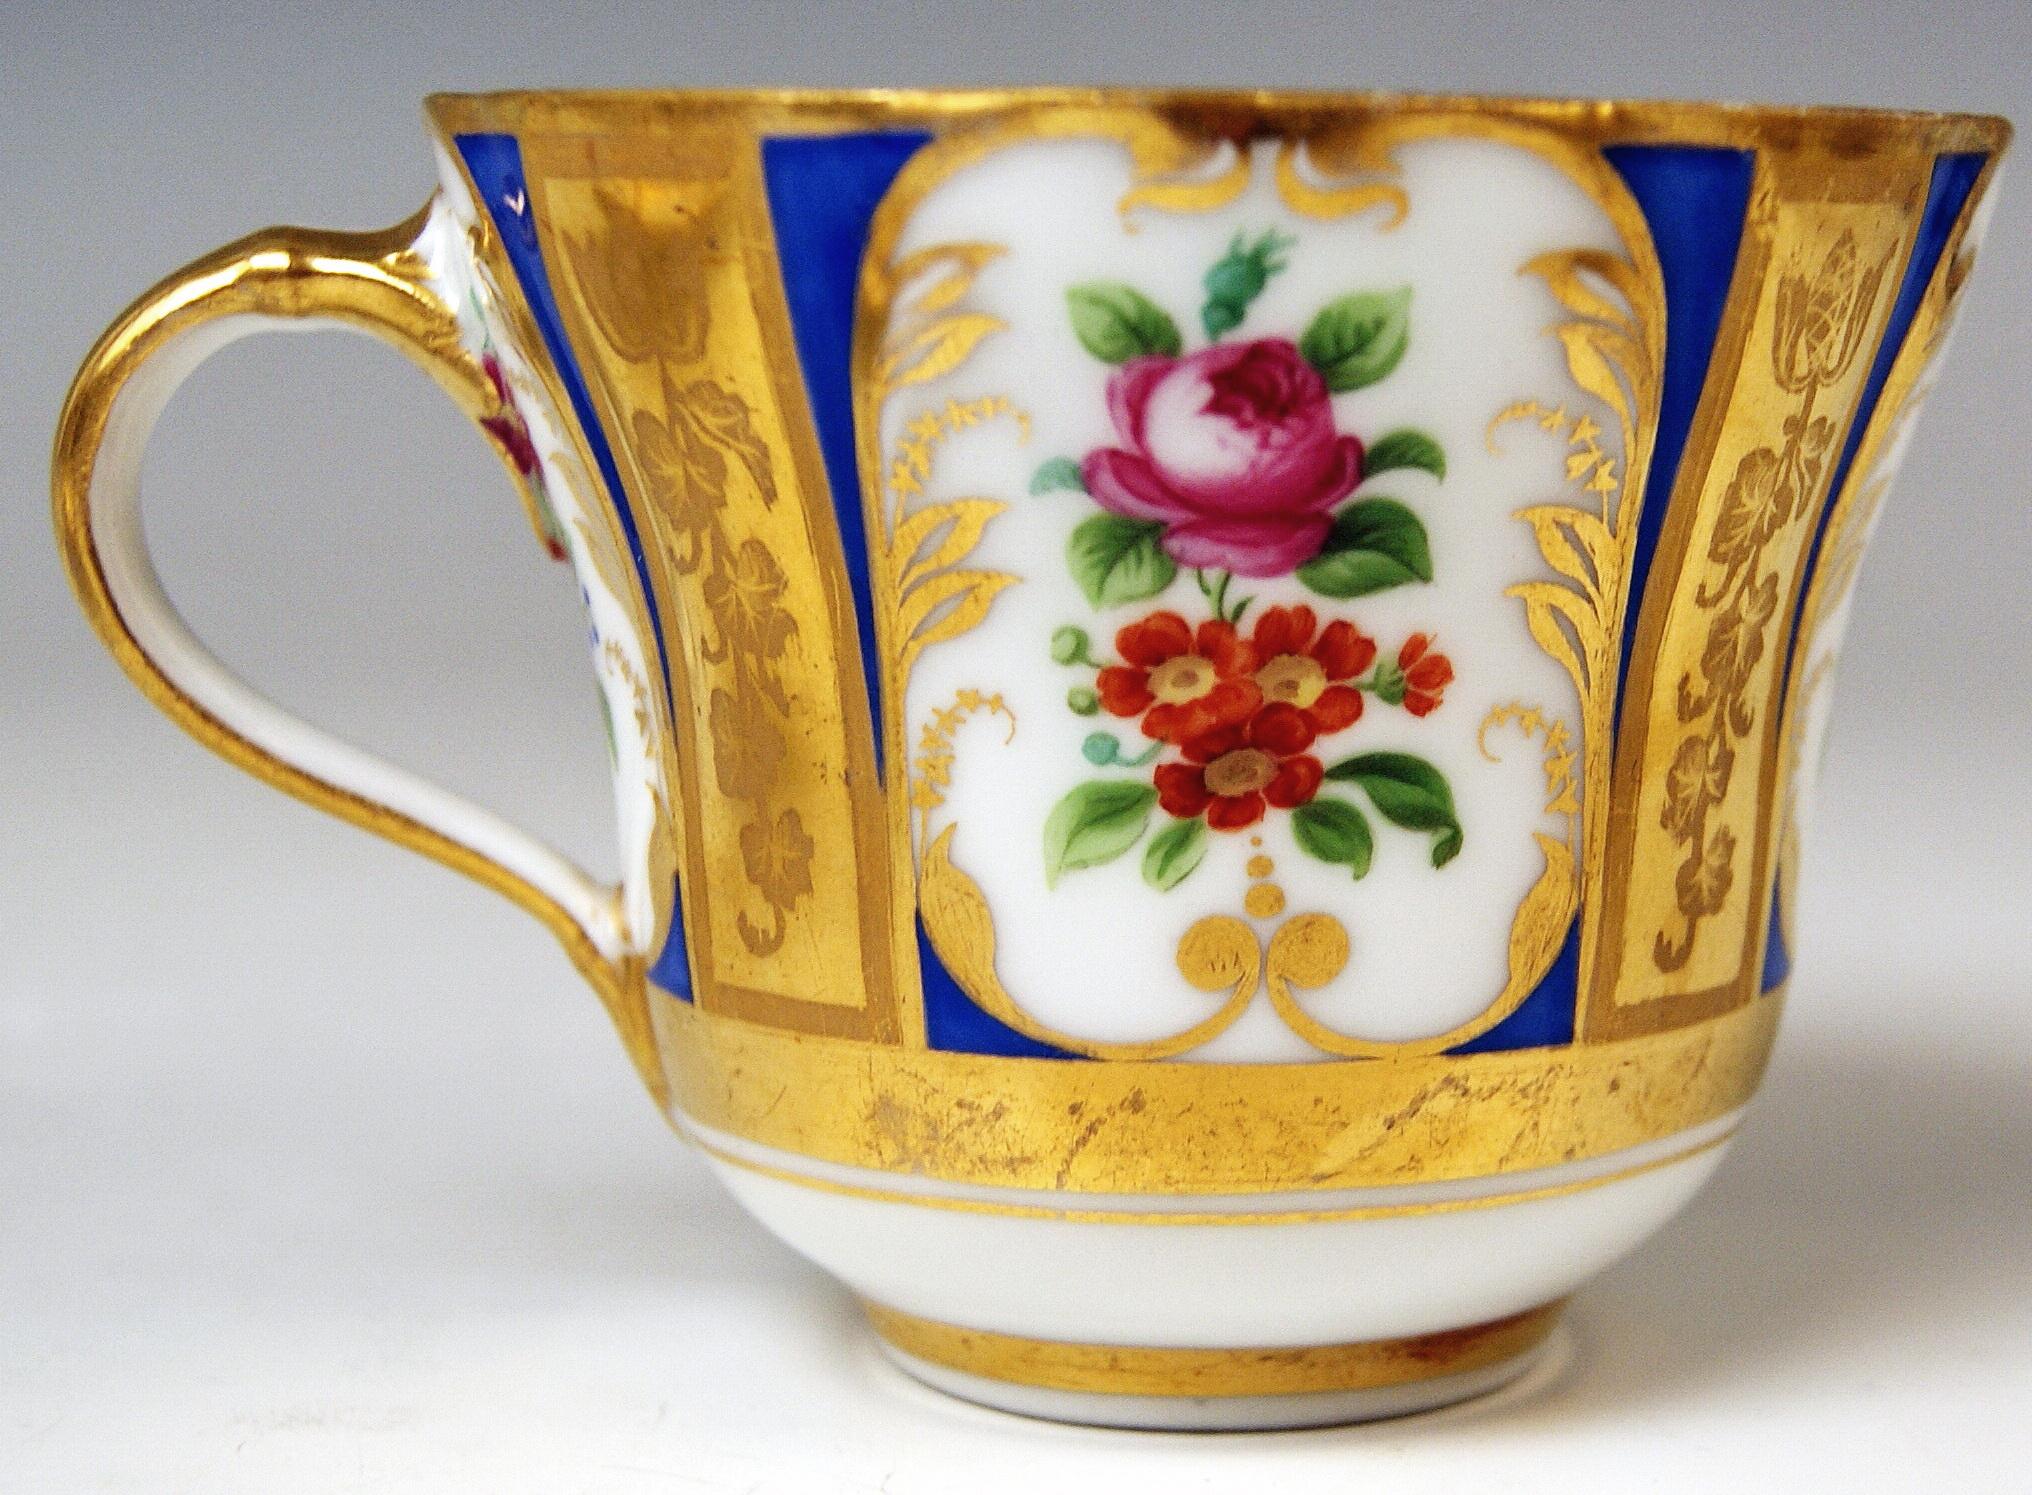 Austrian Vienna Imperial Porcelain Cup Saucer Painted with Flowers Golden Shaded, 1855